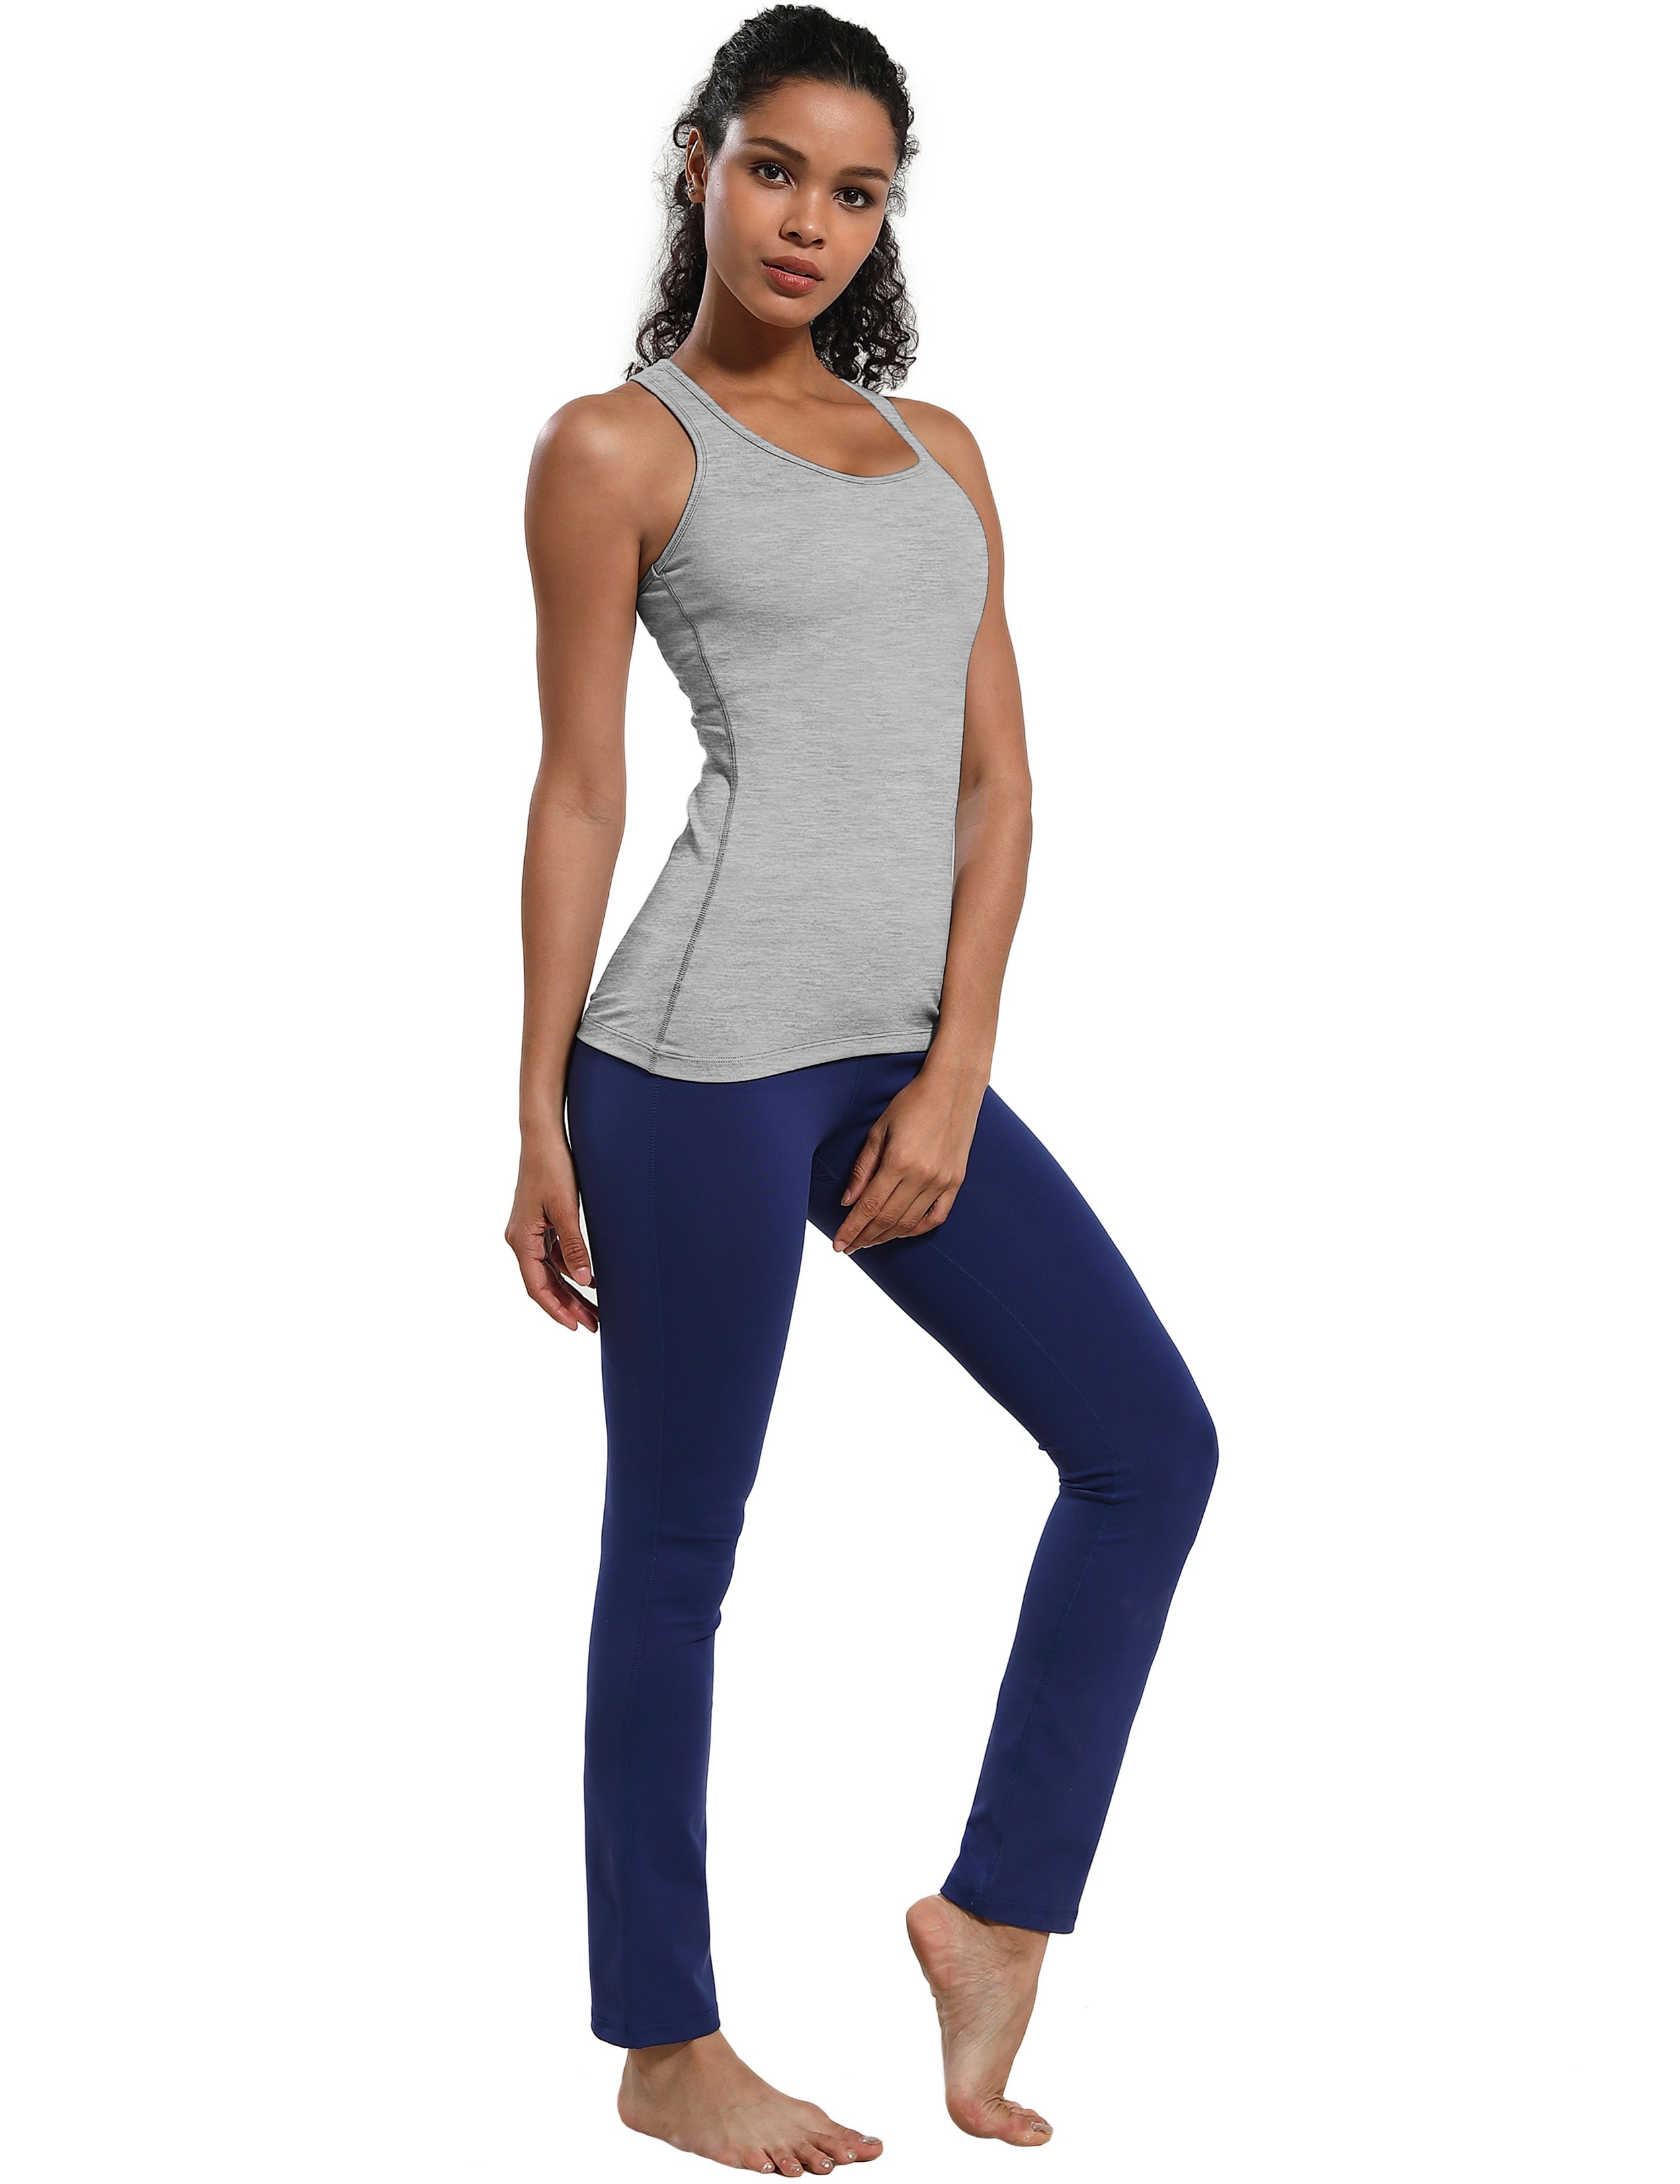 Racerback Athletic Tank Tops heathergray 92%Nylon/8%Spandex(Cotton Soft) Designed for Jogging Tight Fit So buttery soft, it feels weightless Sweat-wicking Four-way stretch Breathable Contours your body Sits below the waistband for moderate, everyday coverage